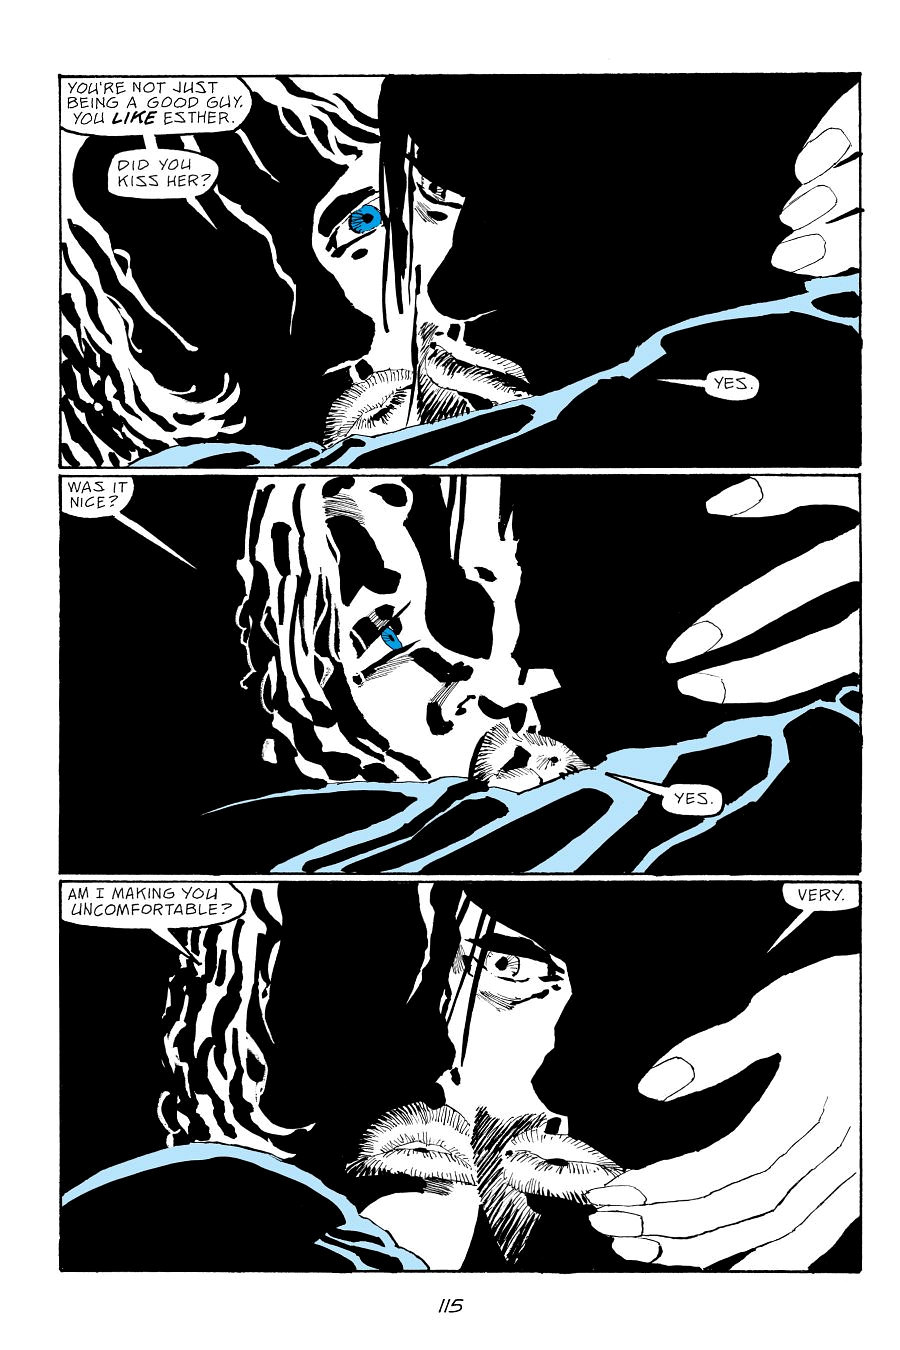 page 115 of sin city 7 hell and back